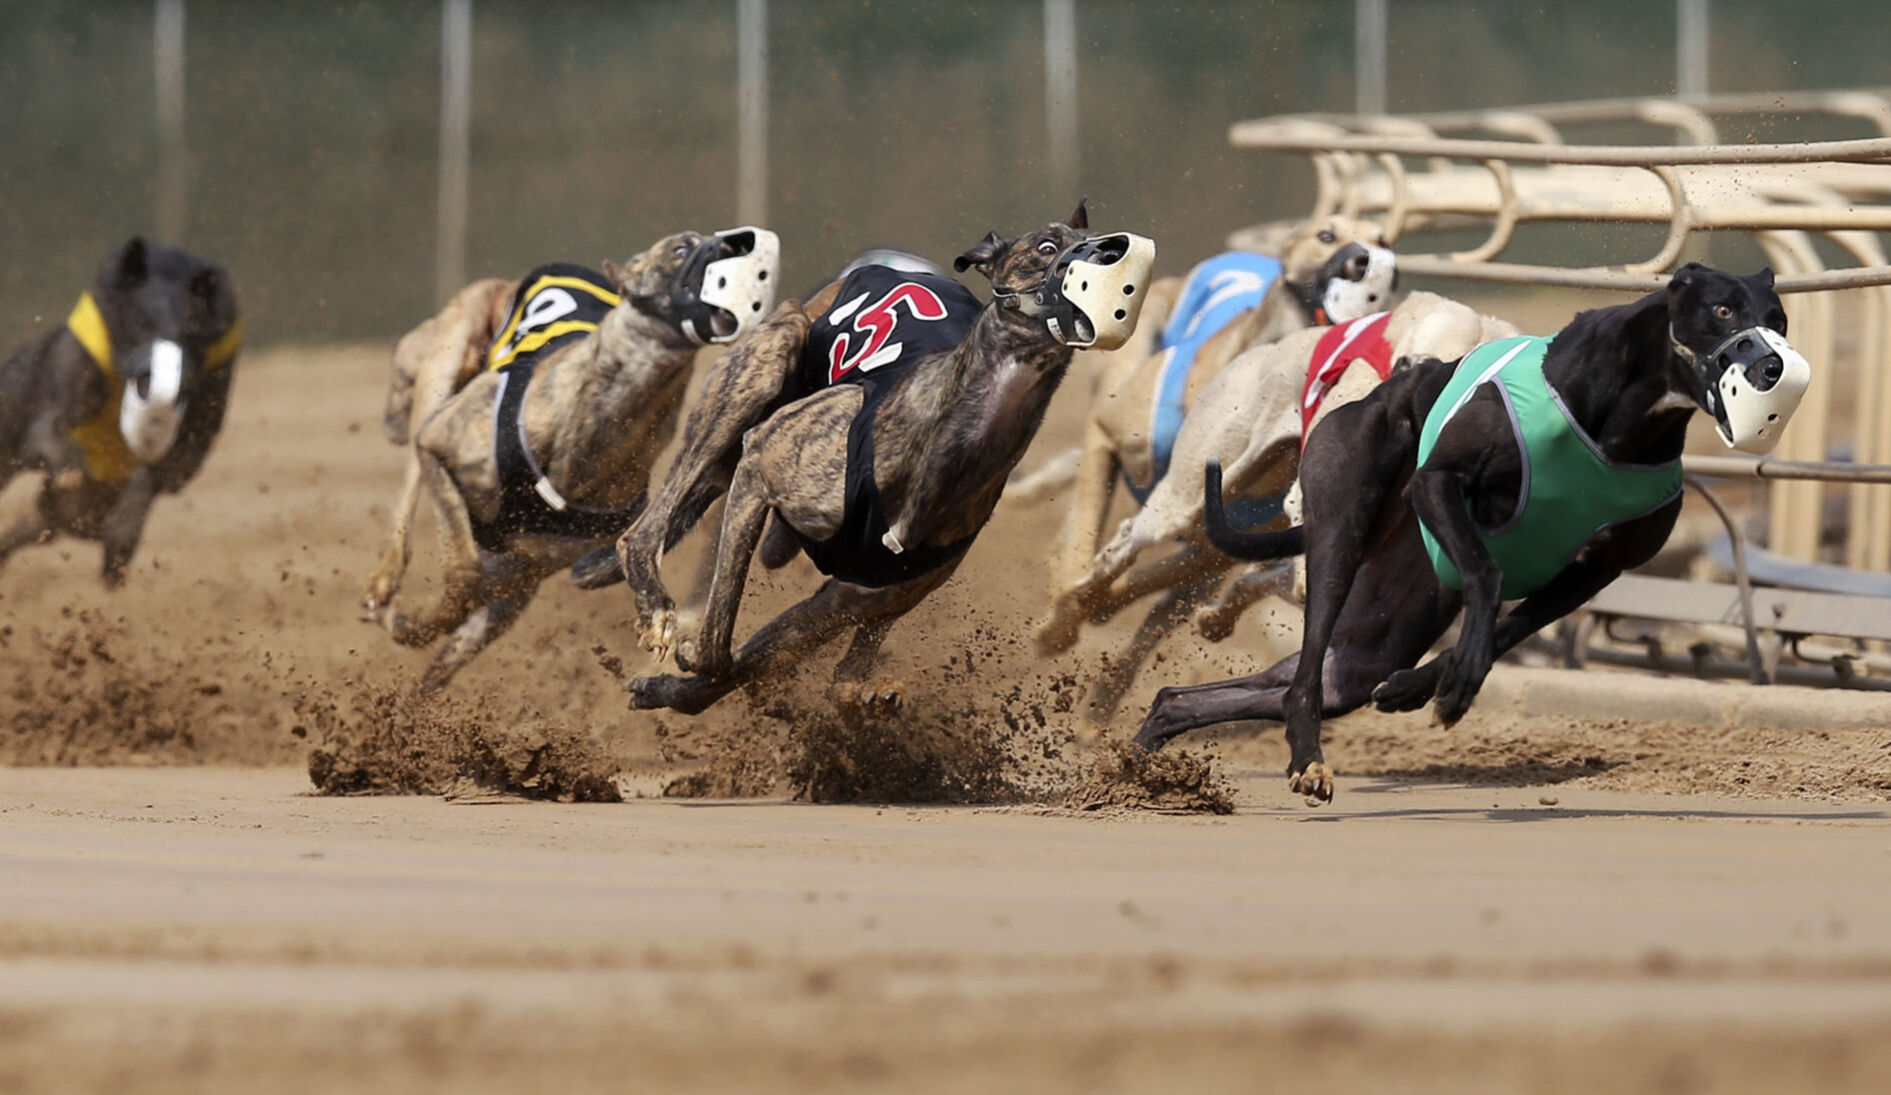 Greyhounds compete at Iowa Greyhound Park in Dubuque in September. PHOTO CREDIT: NICKI KOHL